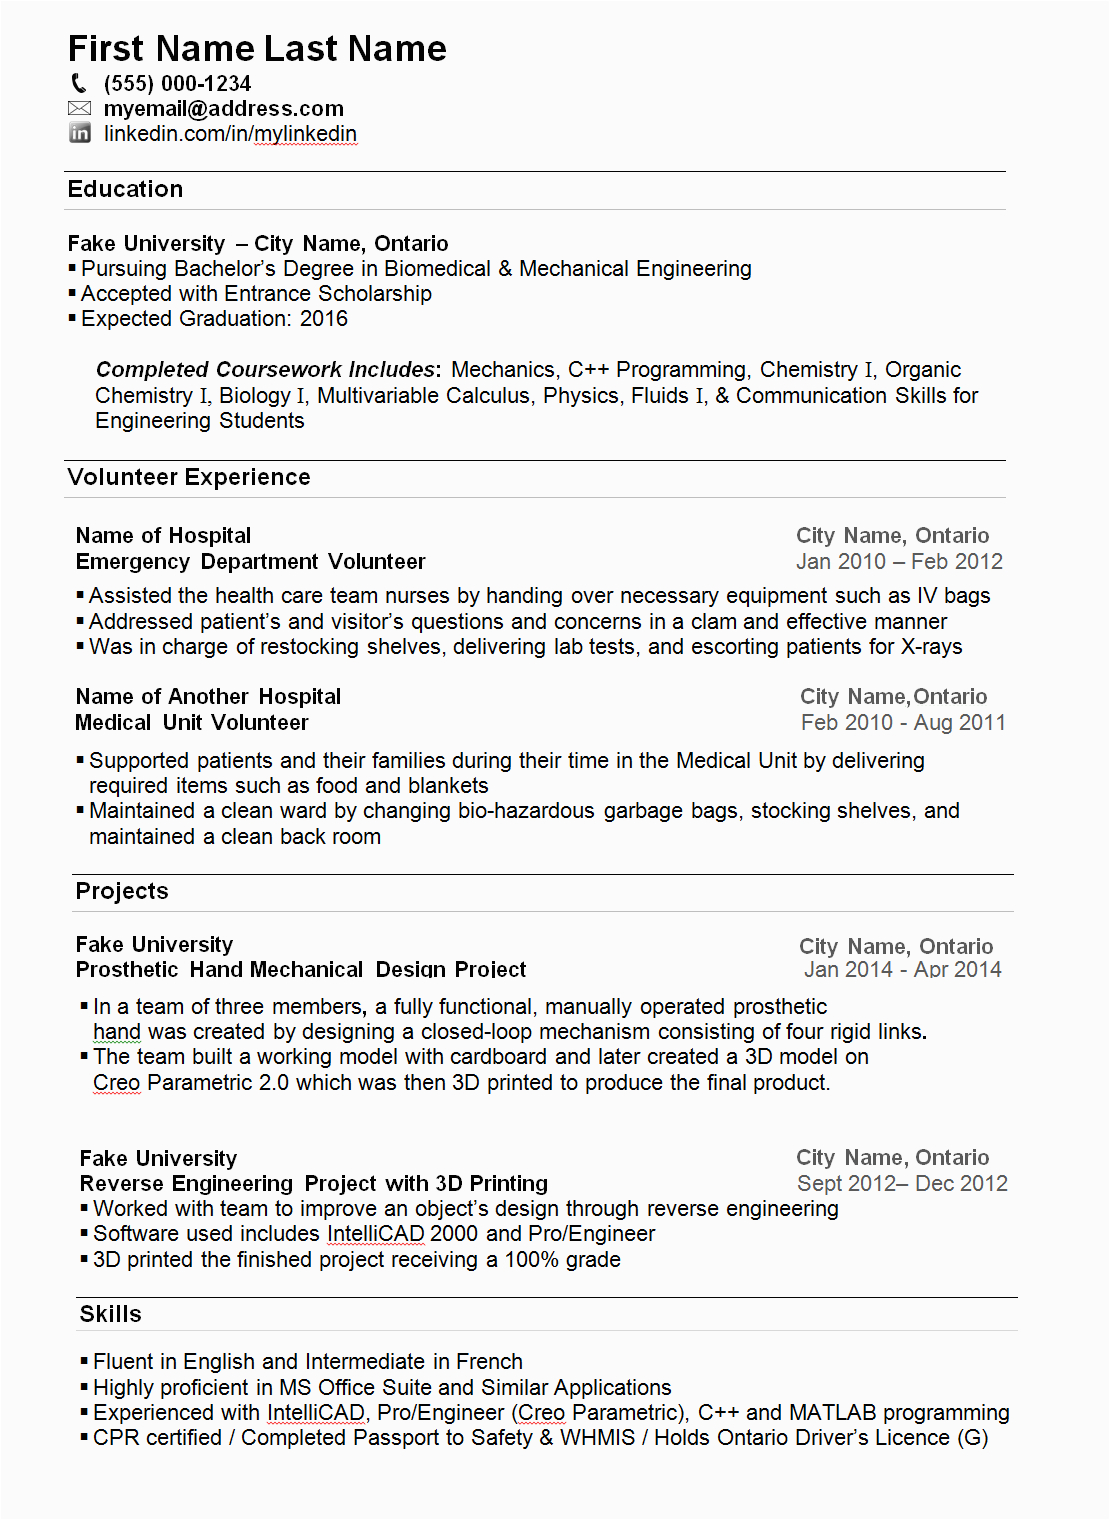 please critic my resume im a college student